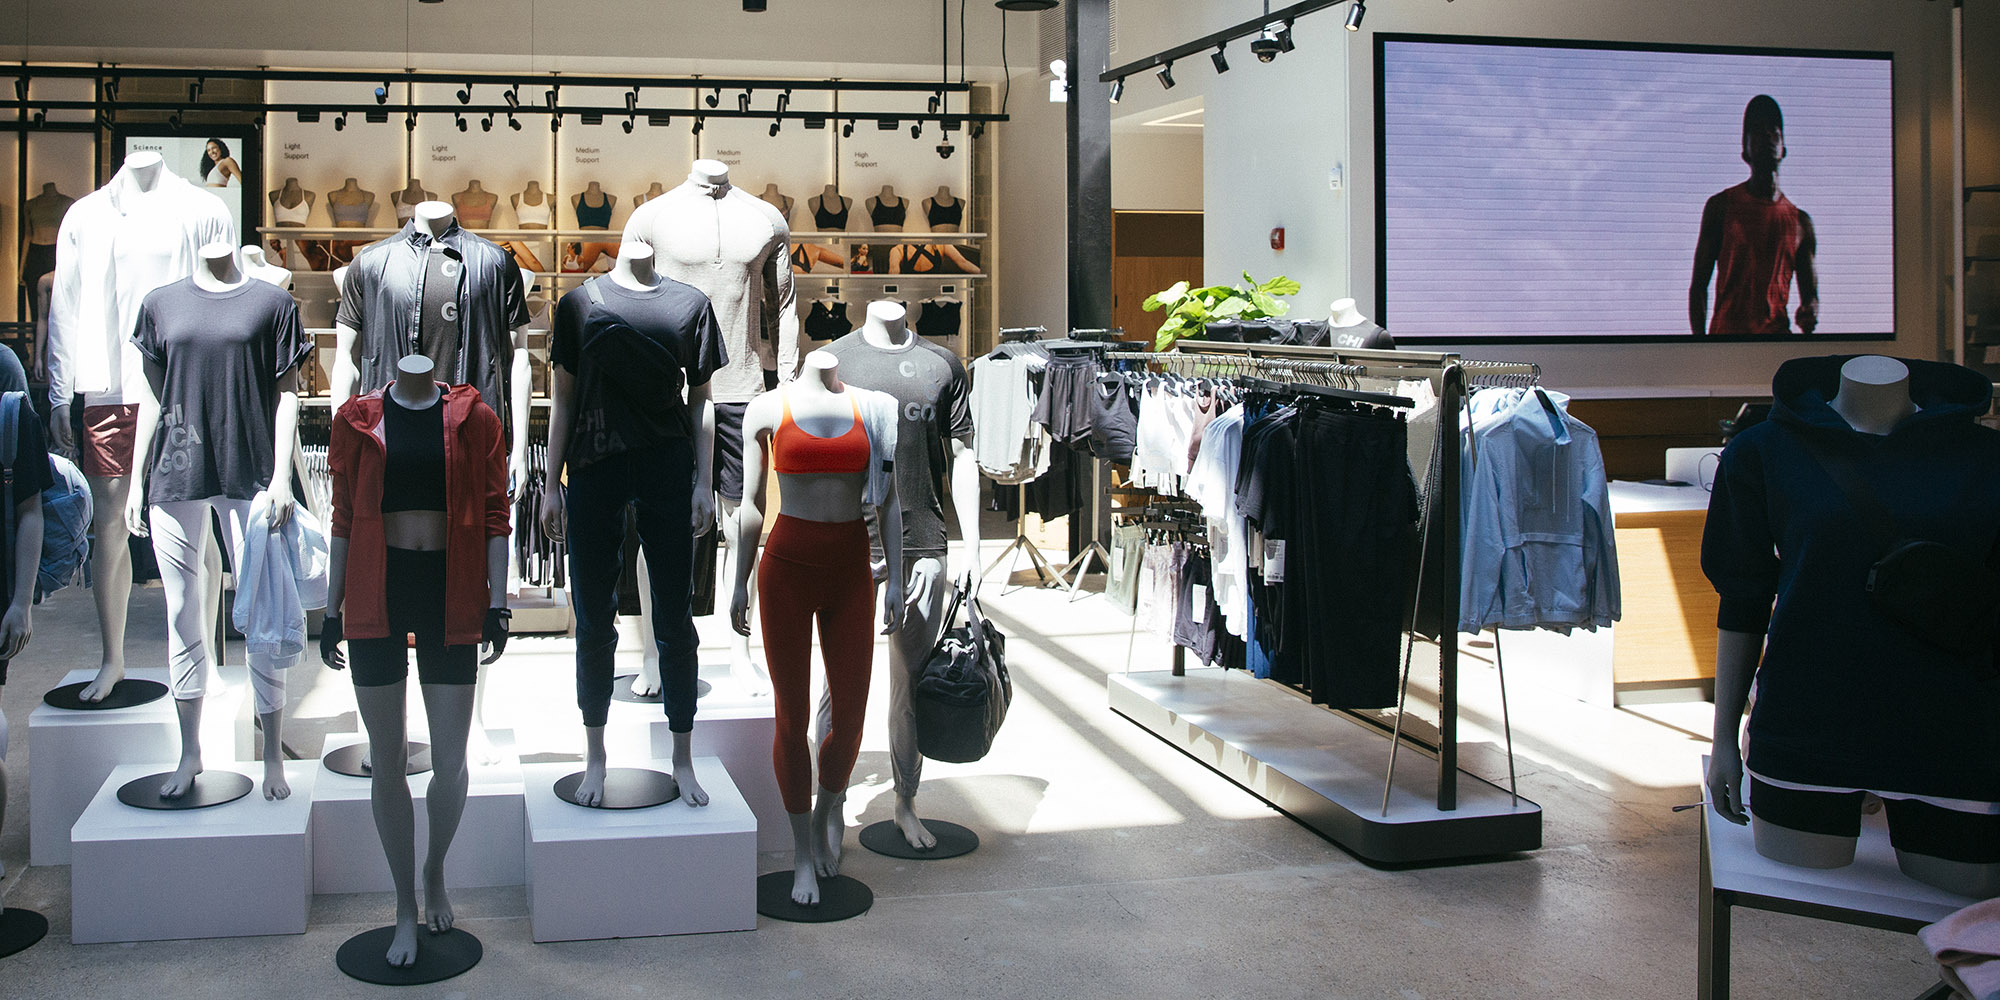 Lululemon Defies Brick-and-Mortar Woes in Plan to Add Stores - Bloomberg